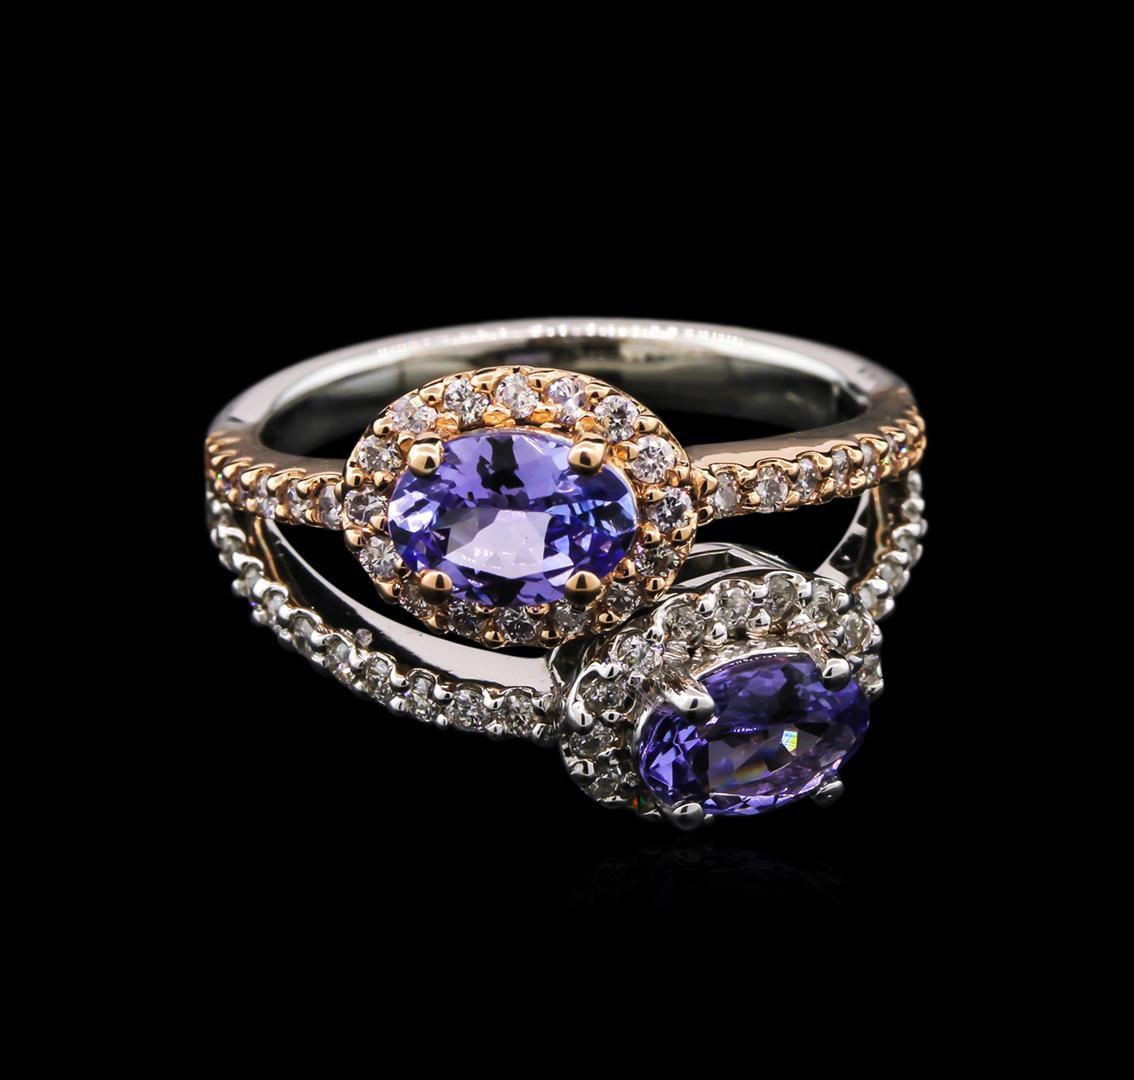 1.34 ctw Tanzanite and Diamond Ring - 14KT Two-Tone Gold